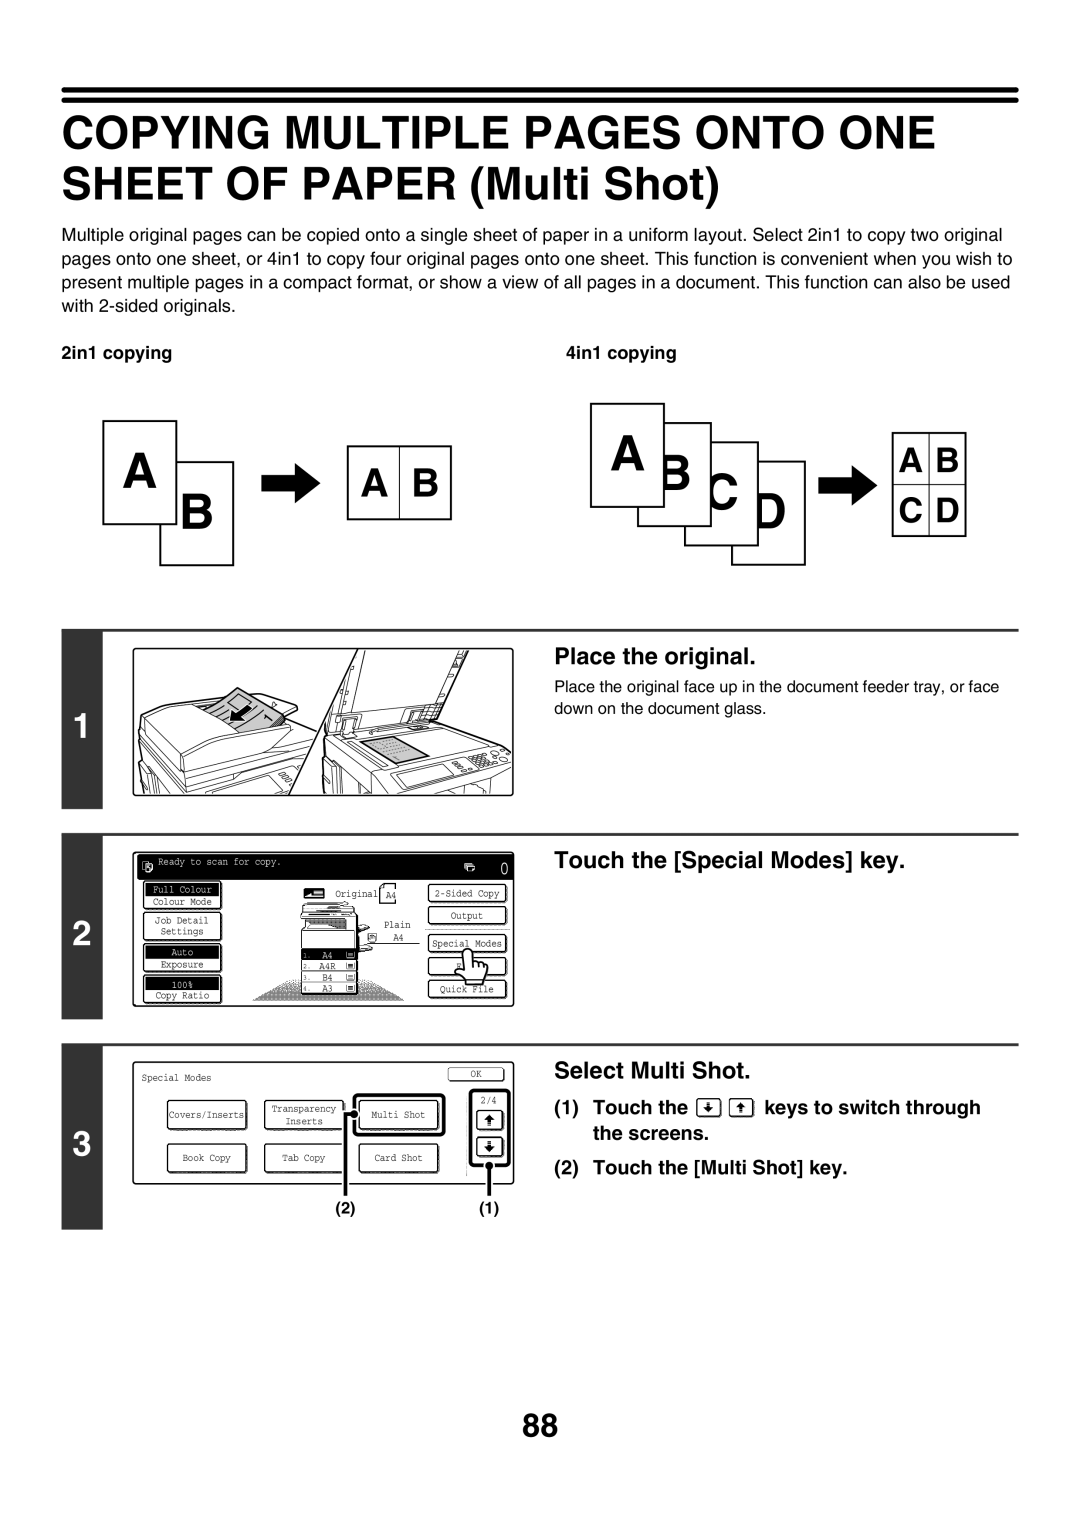 Sharp MX-2700N COPYING MULTIPLE PAGES ONTO ONE SHEET OF PAPER Multi Shot, Select Multi Shot, Touch the Multi Shot key 